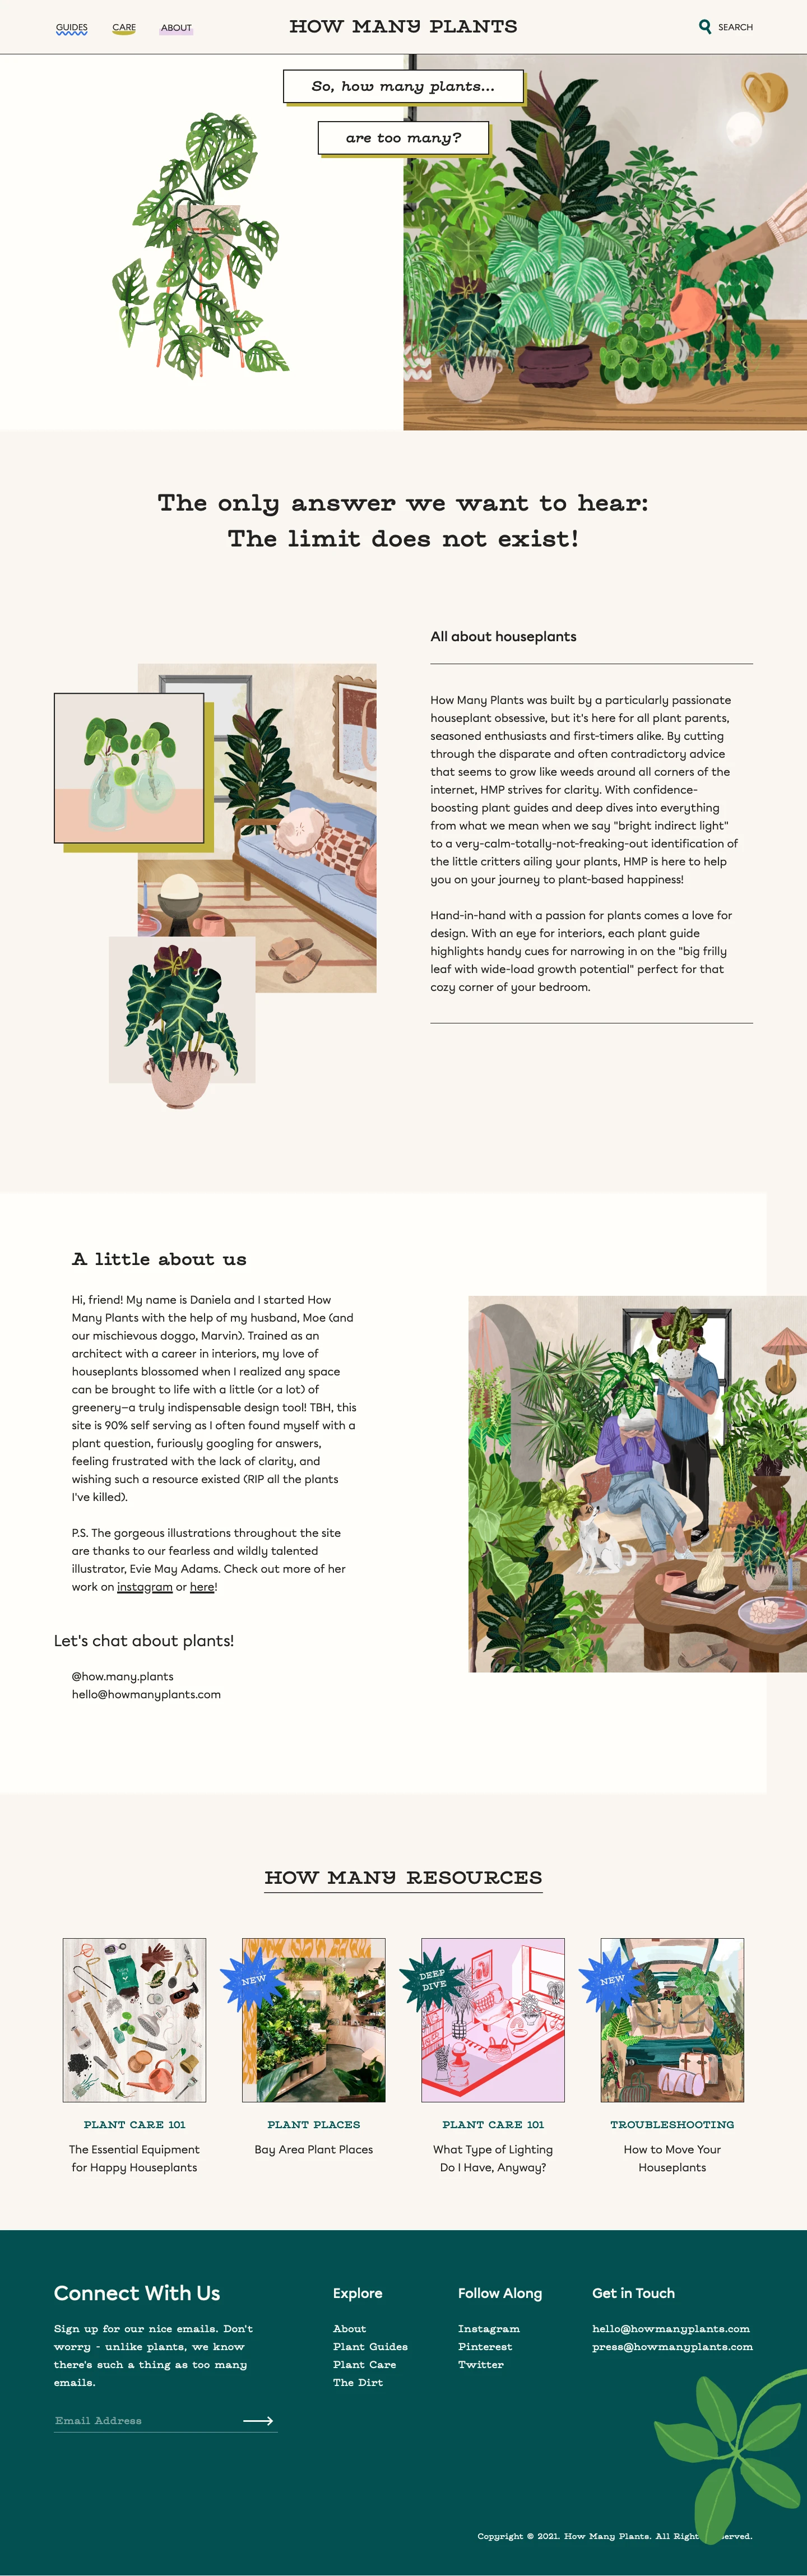 How Many Plants Landing Page Example: How Many Plants is a growing plant care resource and community for ALL plant parents, seasoned enthusiasts and first-timers alike!